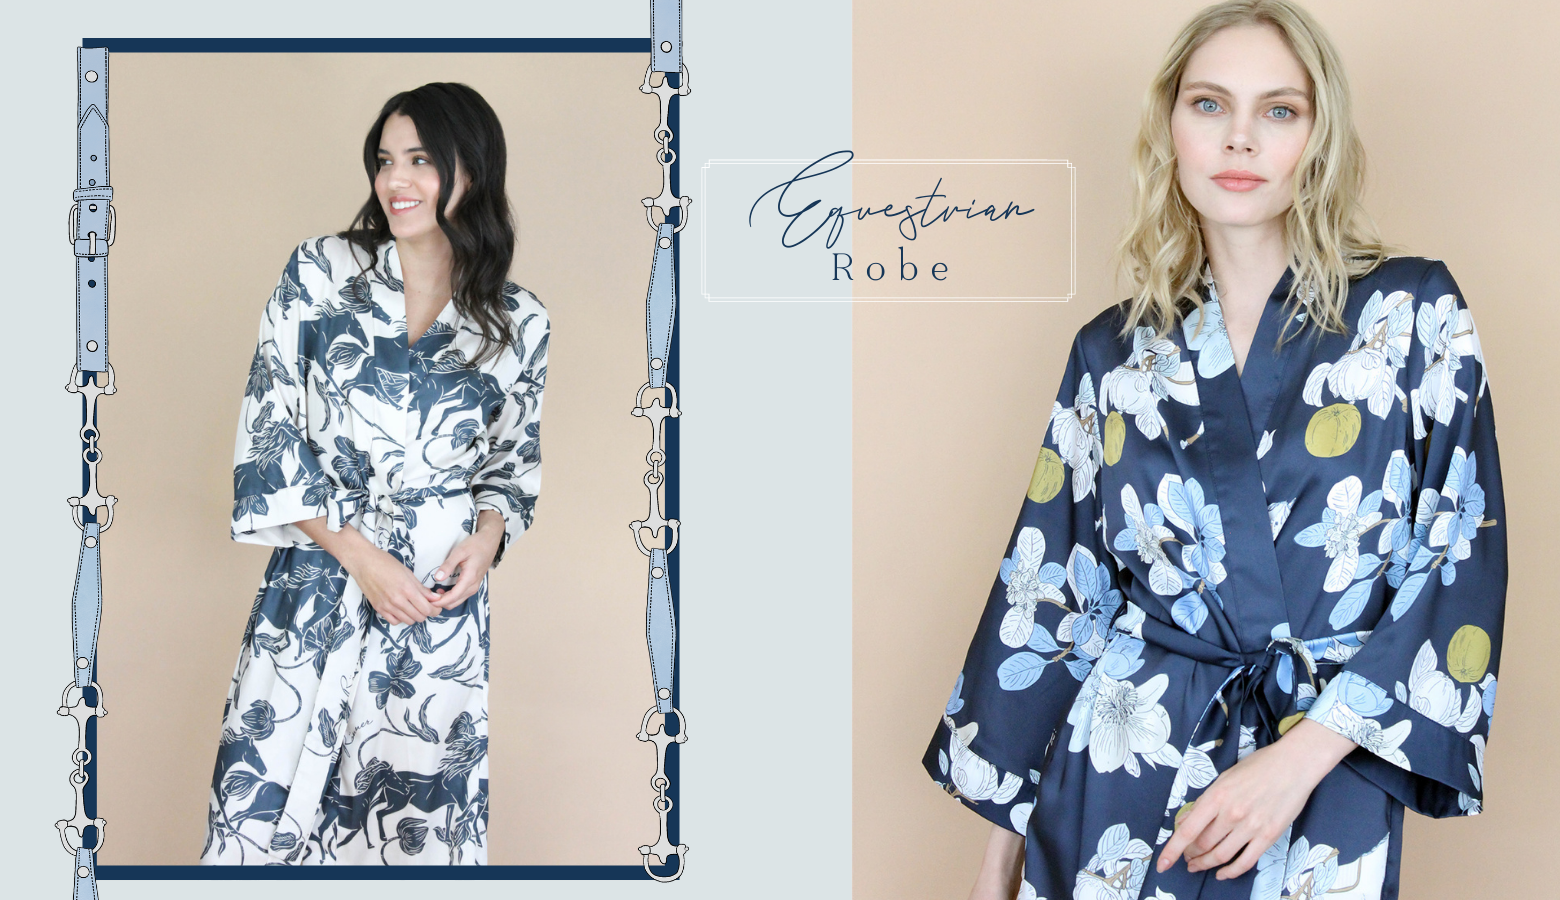 Equestrian Robe: For the Mom Who Wants Comfort